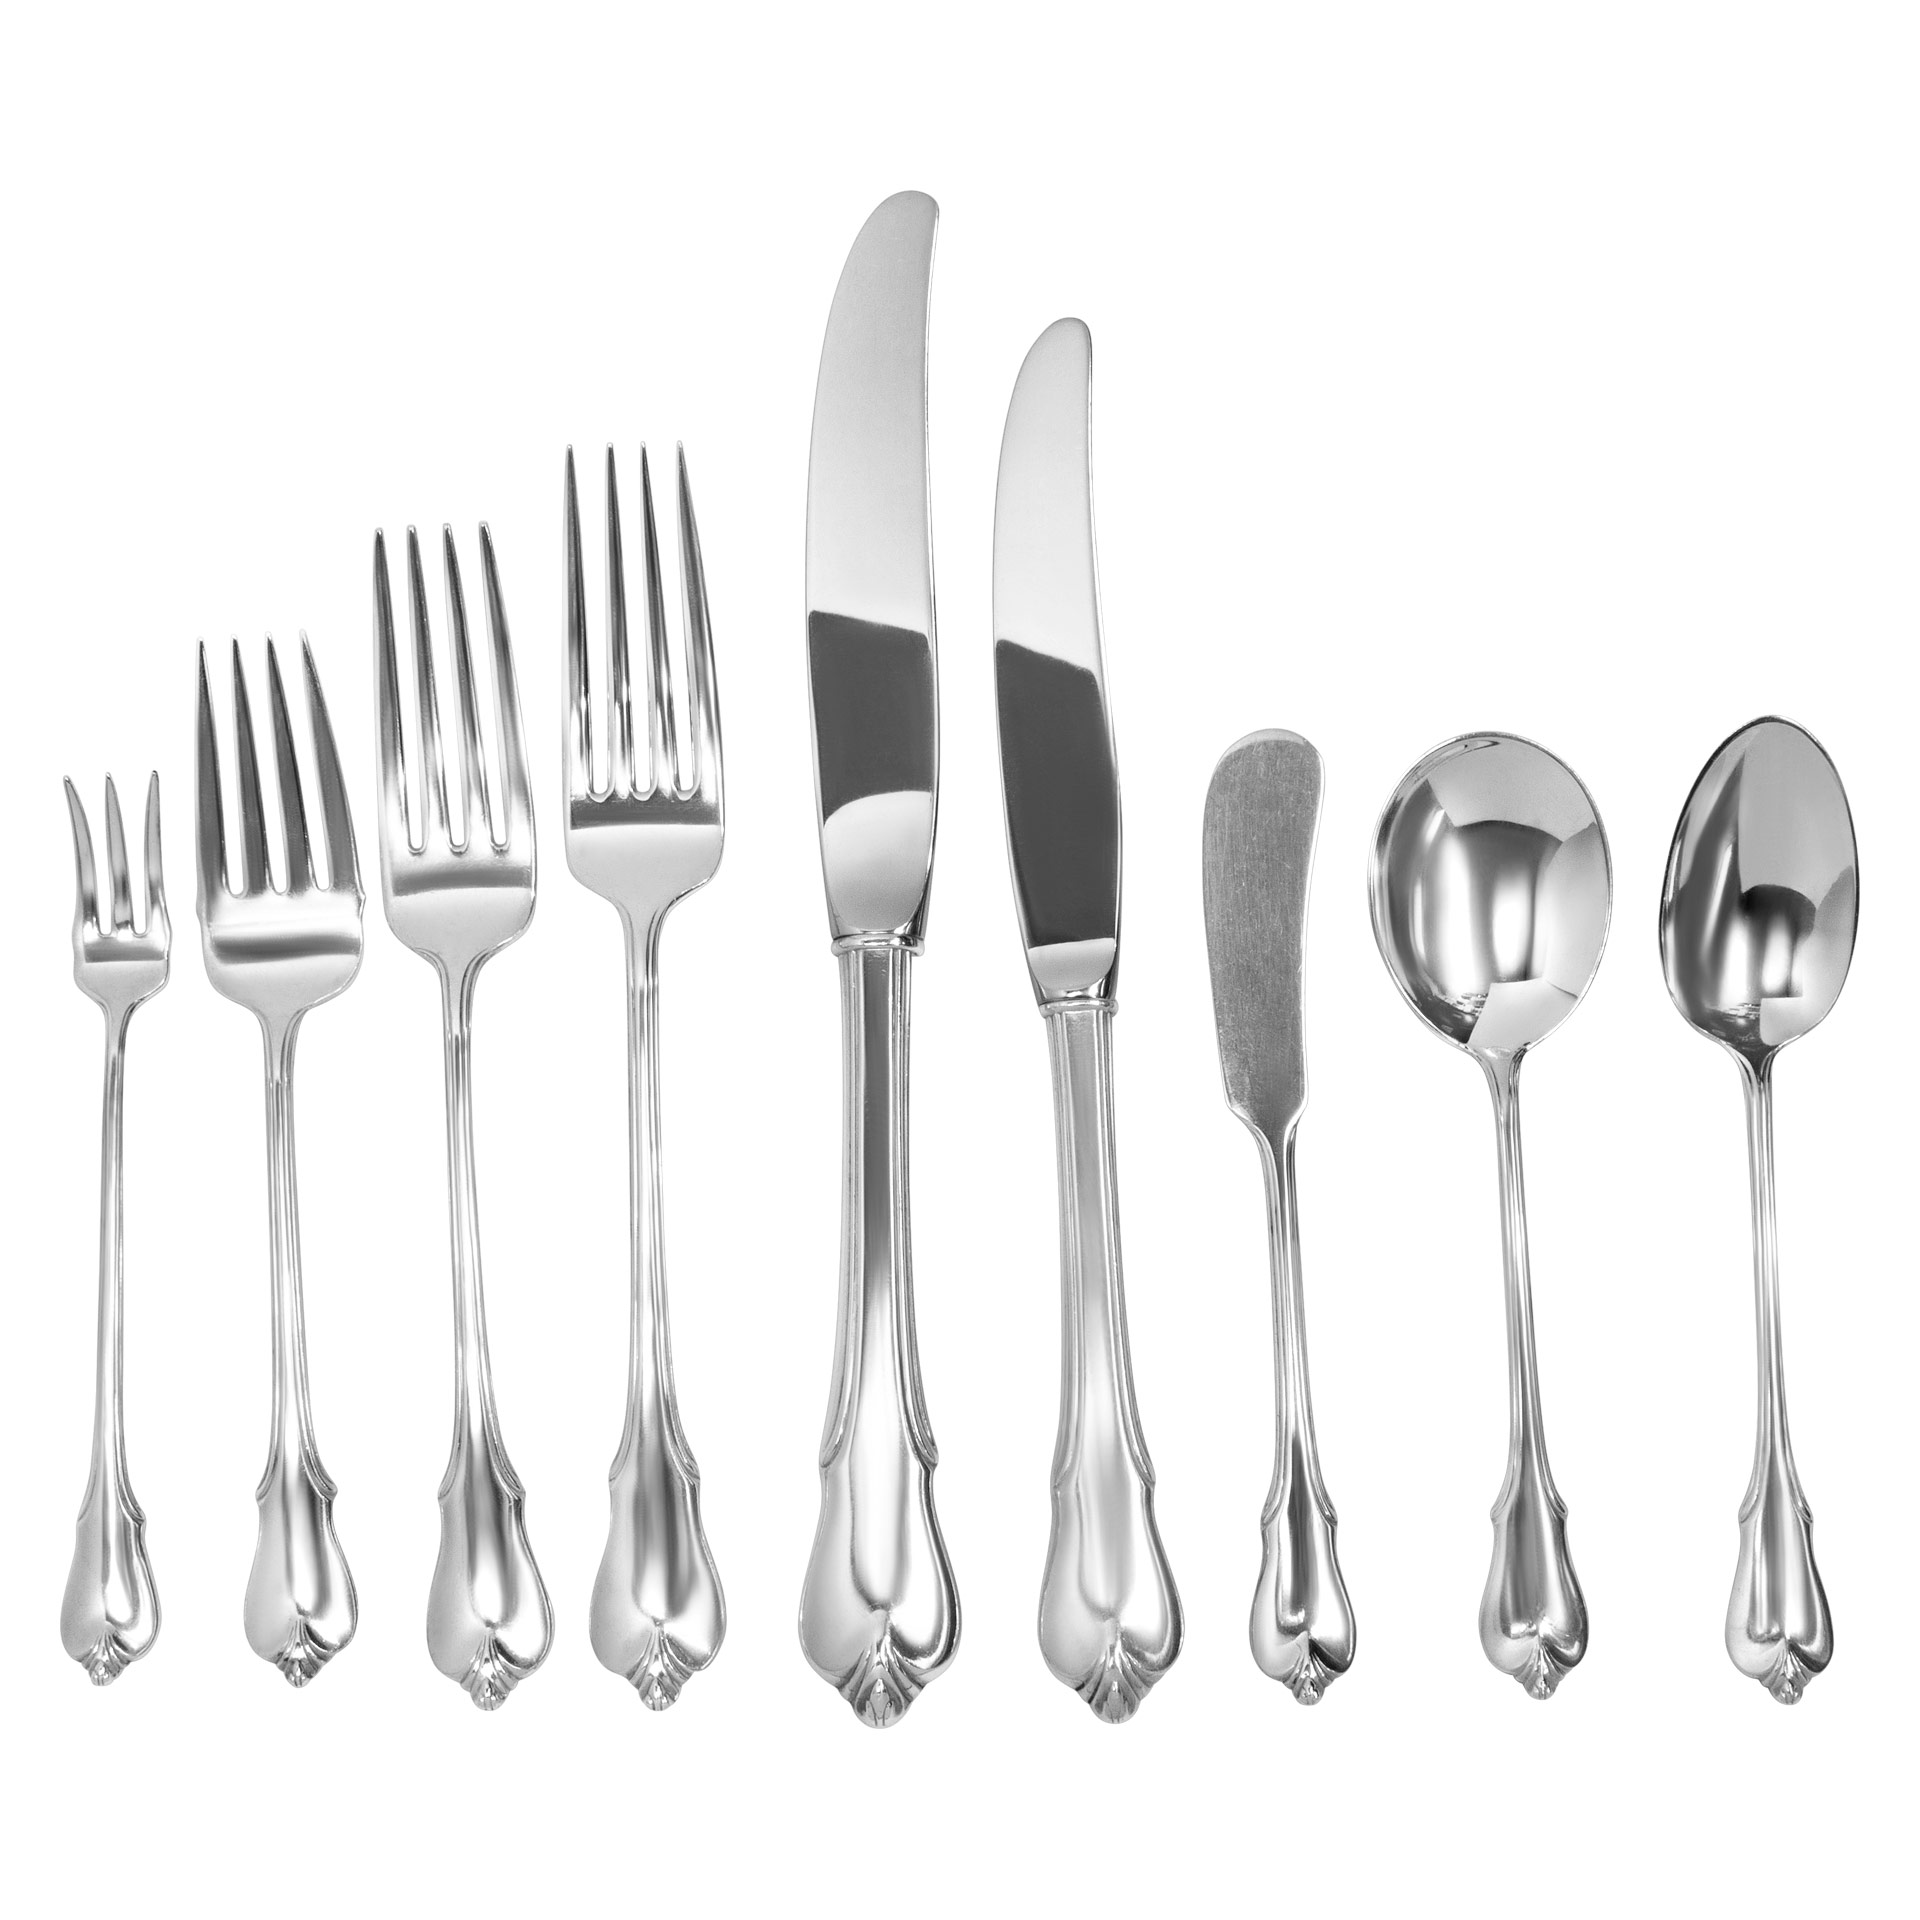 "GRAND COLONIAL" sterling silver flatware set patented in 1942 by WALLACE- 115 pieces total-  9 Place setting for 12 (dinner & lunch) + 7 Serving Pieces. Approx. 160 ounces troy of .925 sterling silver.